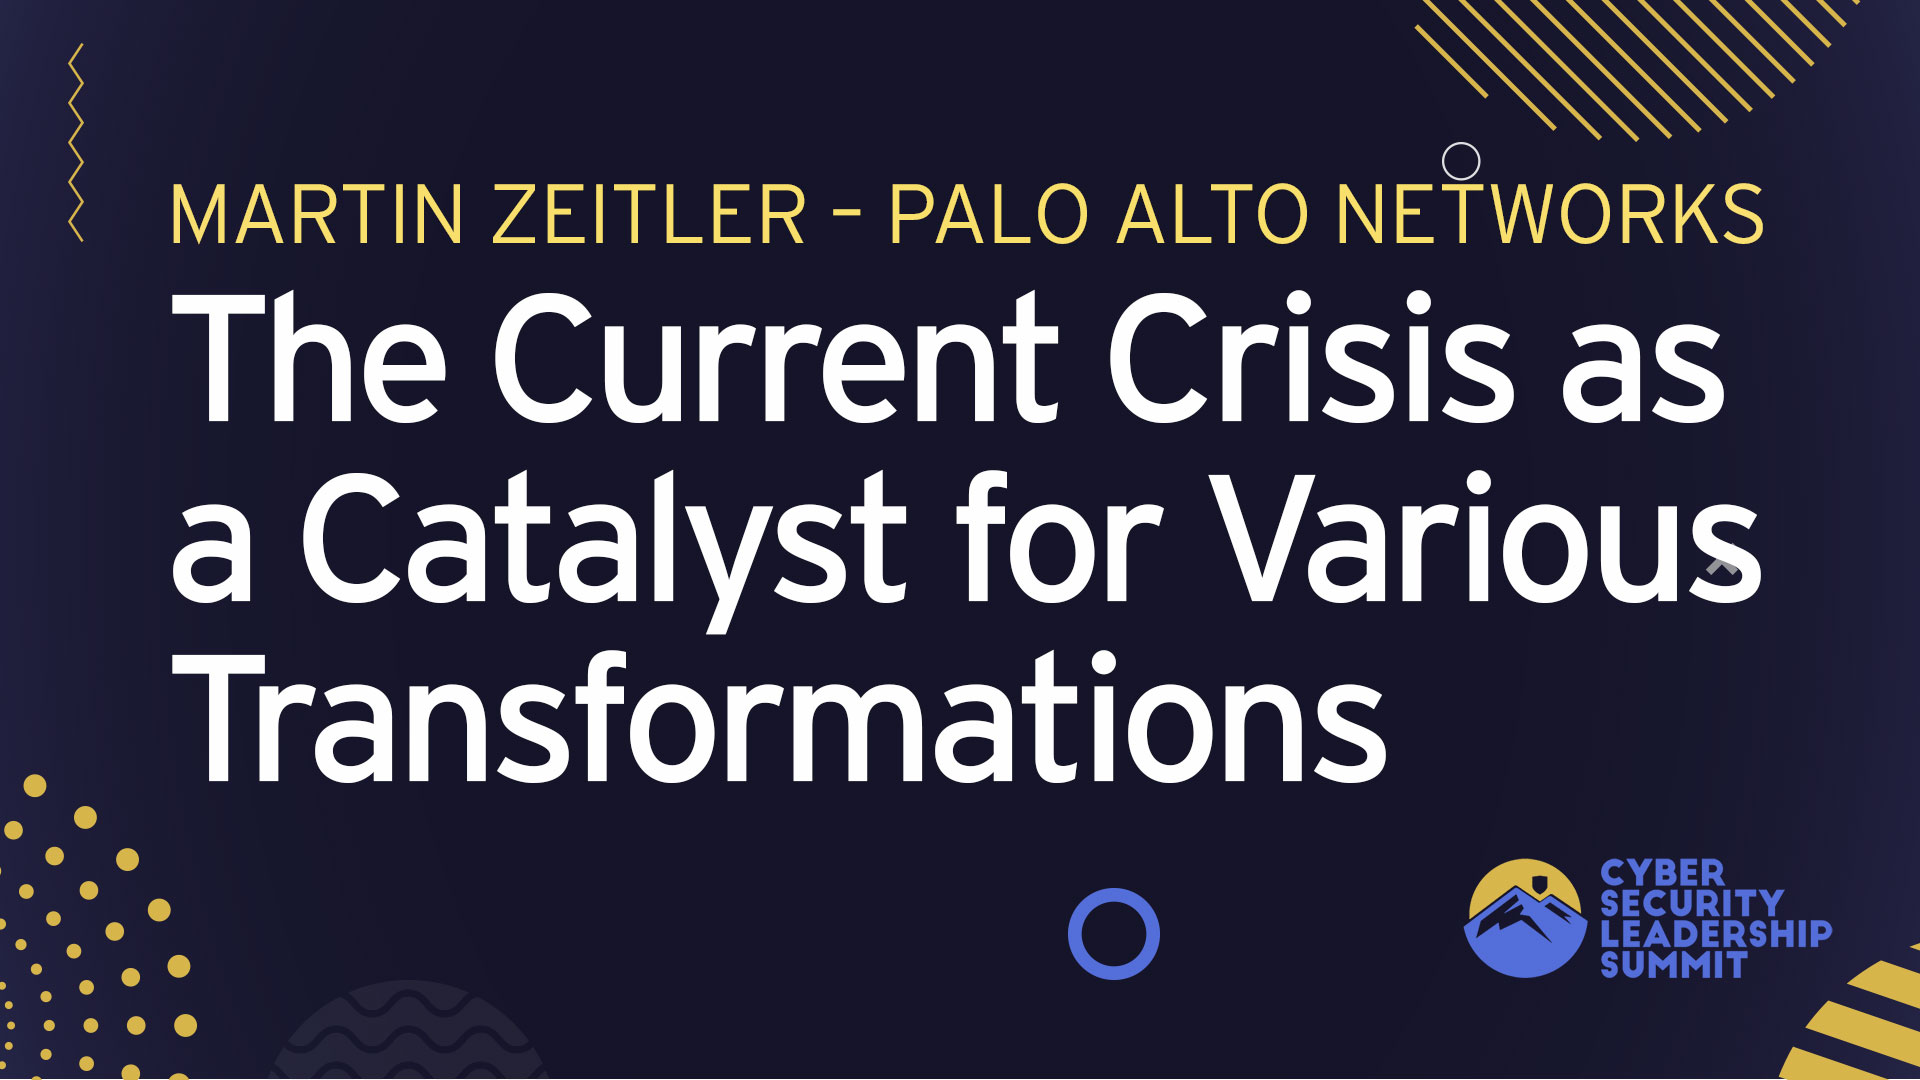 How the Current Crisis could become a Catalyst for Various Transformations